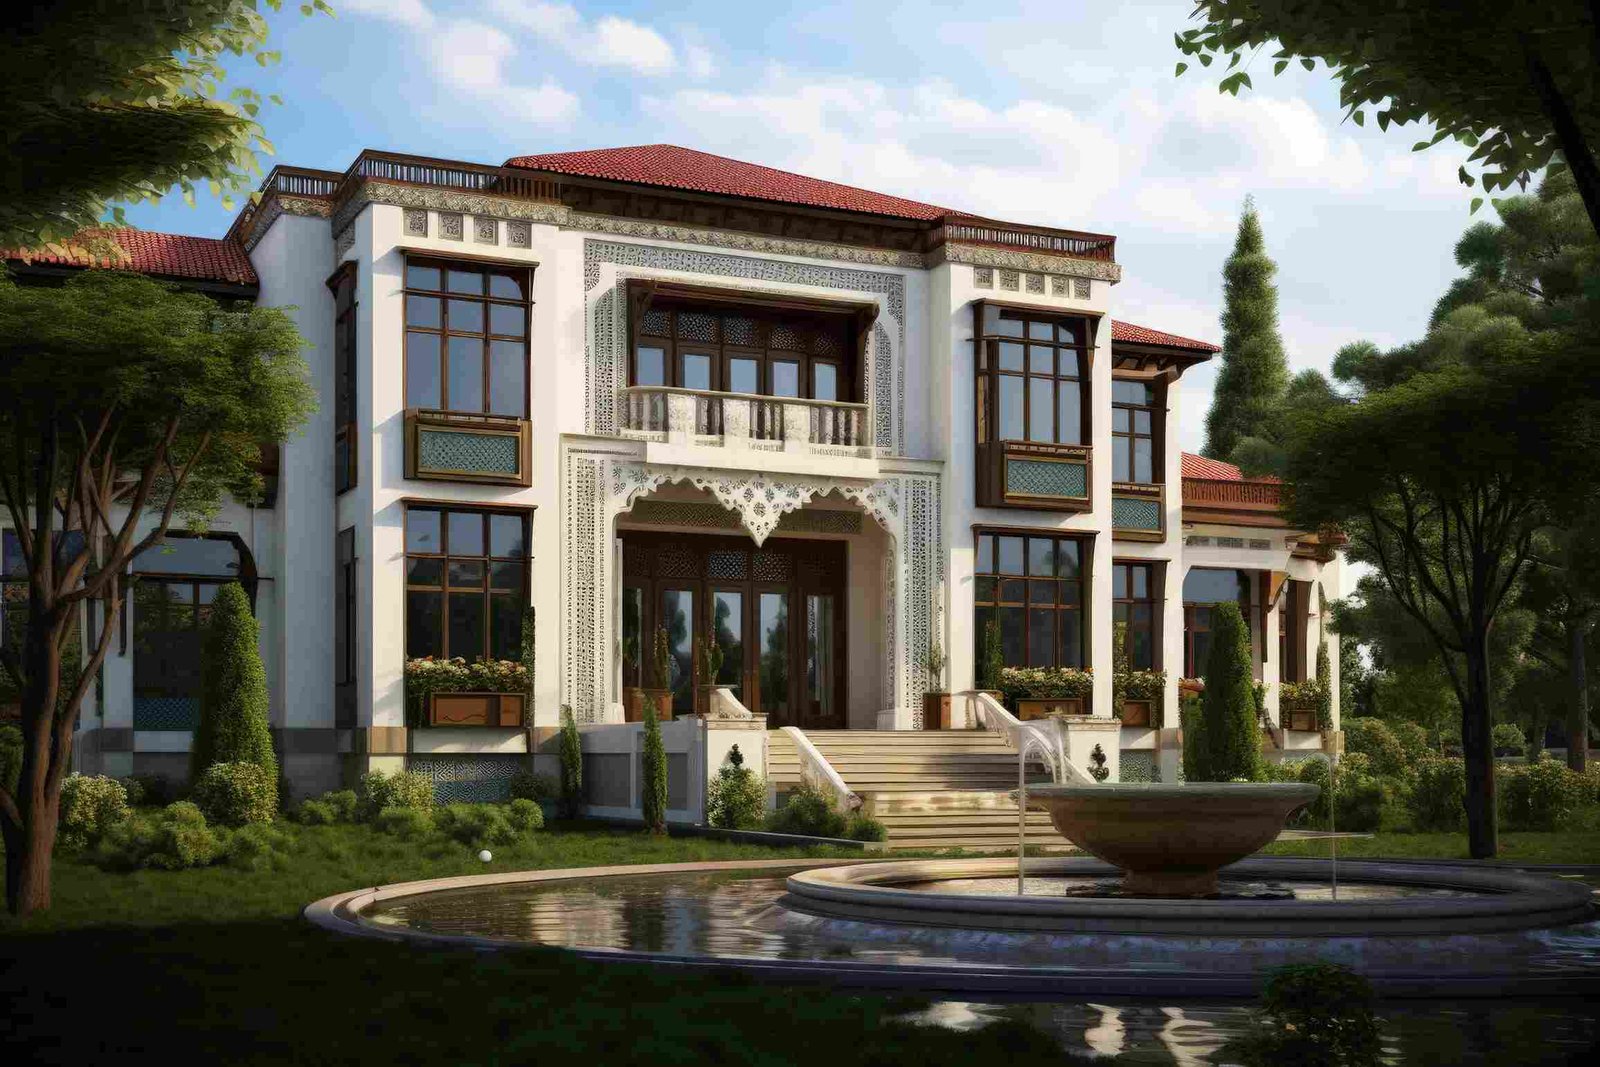 How Does the Location of Amari Hills Add to Its Appeal as a Luxury Living Villa Destination? - blogrism.com